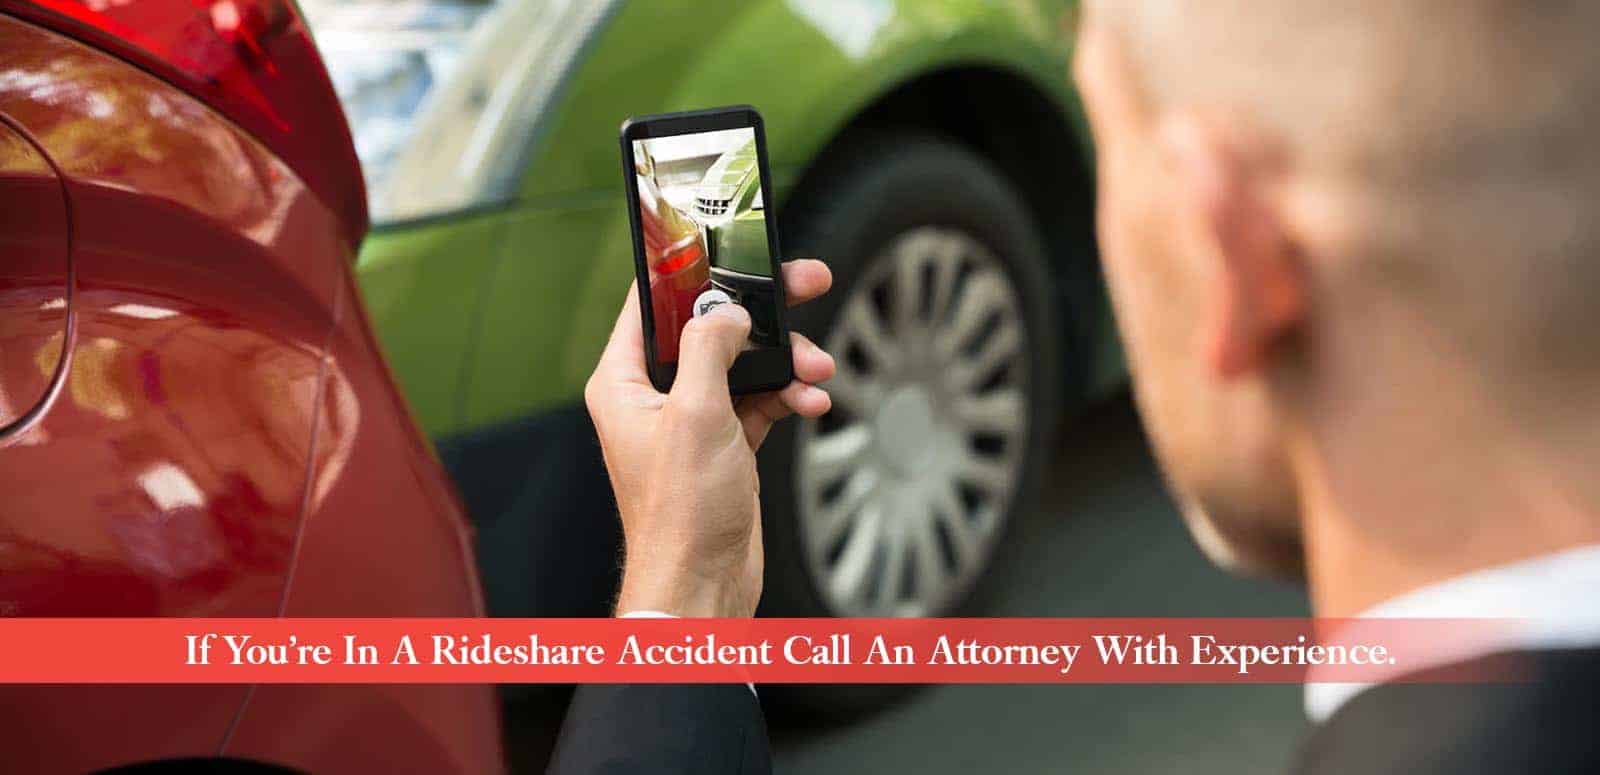 If you're in a rideshare accident Call An Attorney With Experience.